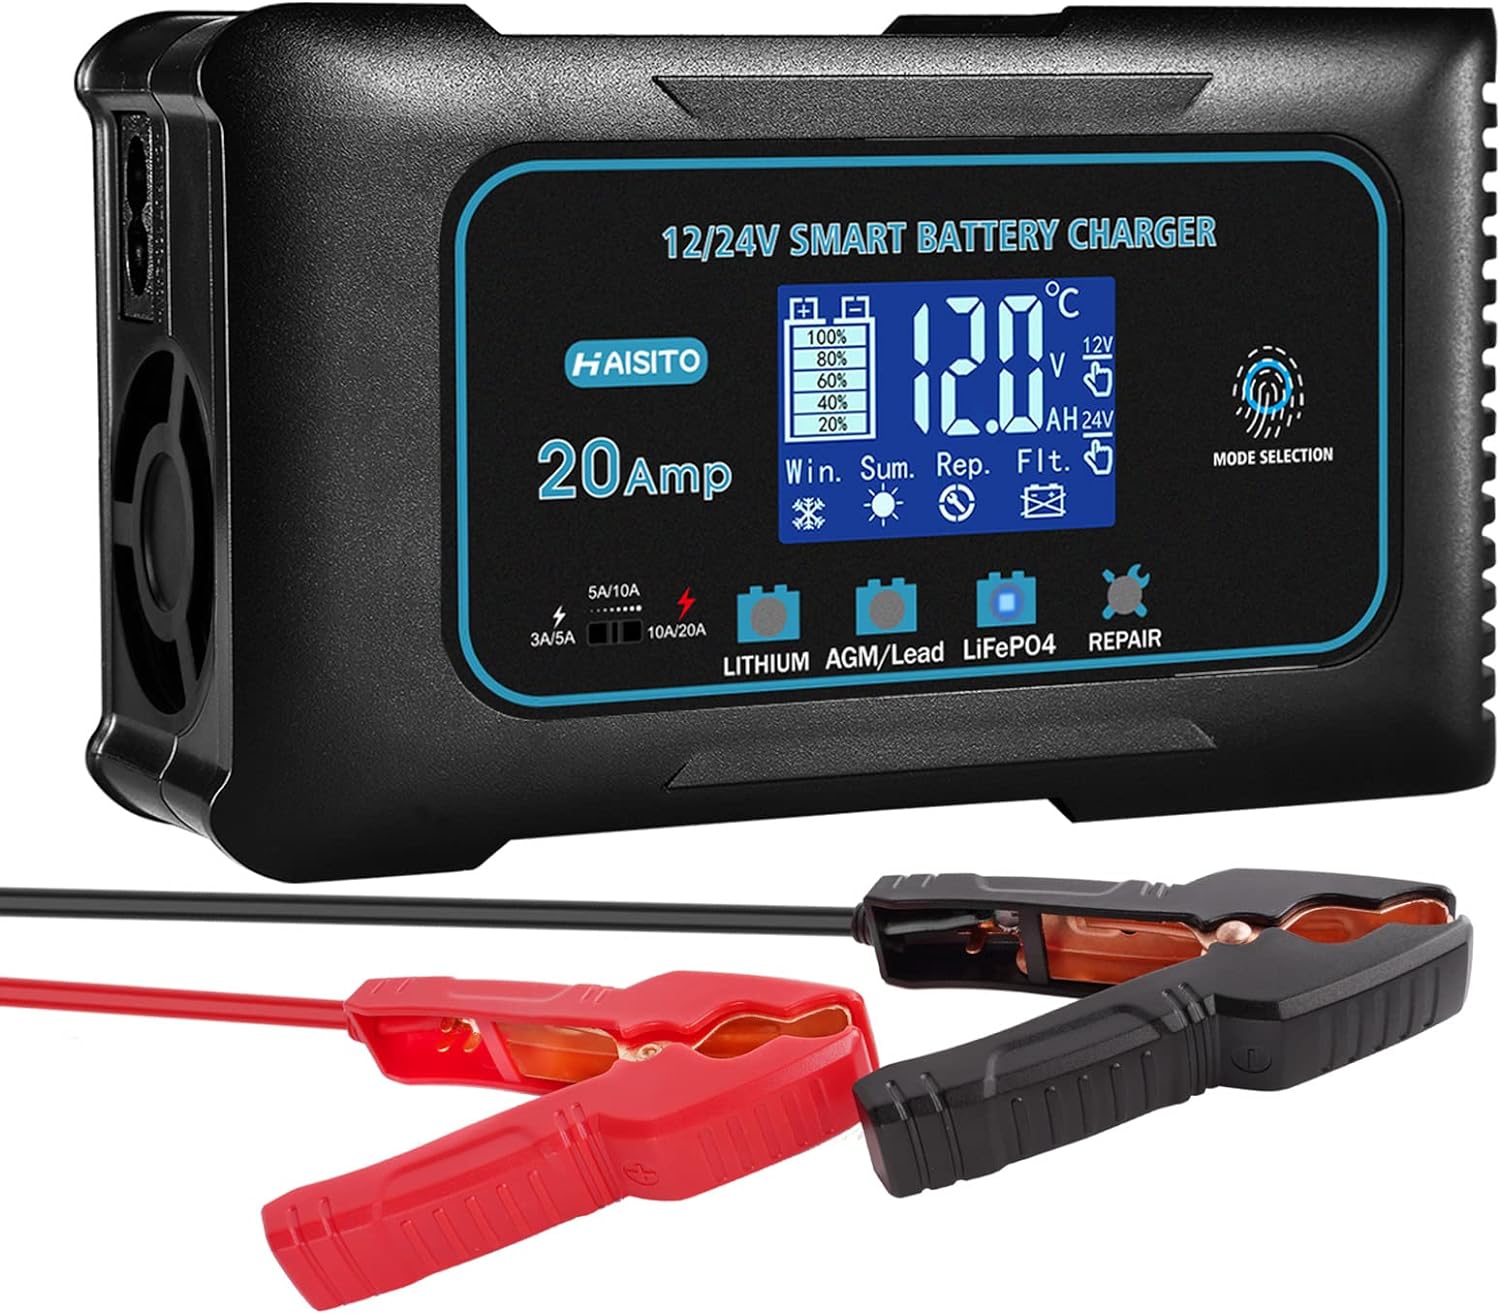 20 Amp Lithium Battery Charger Review